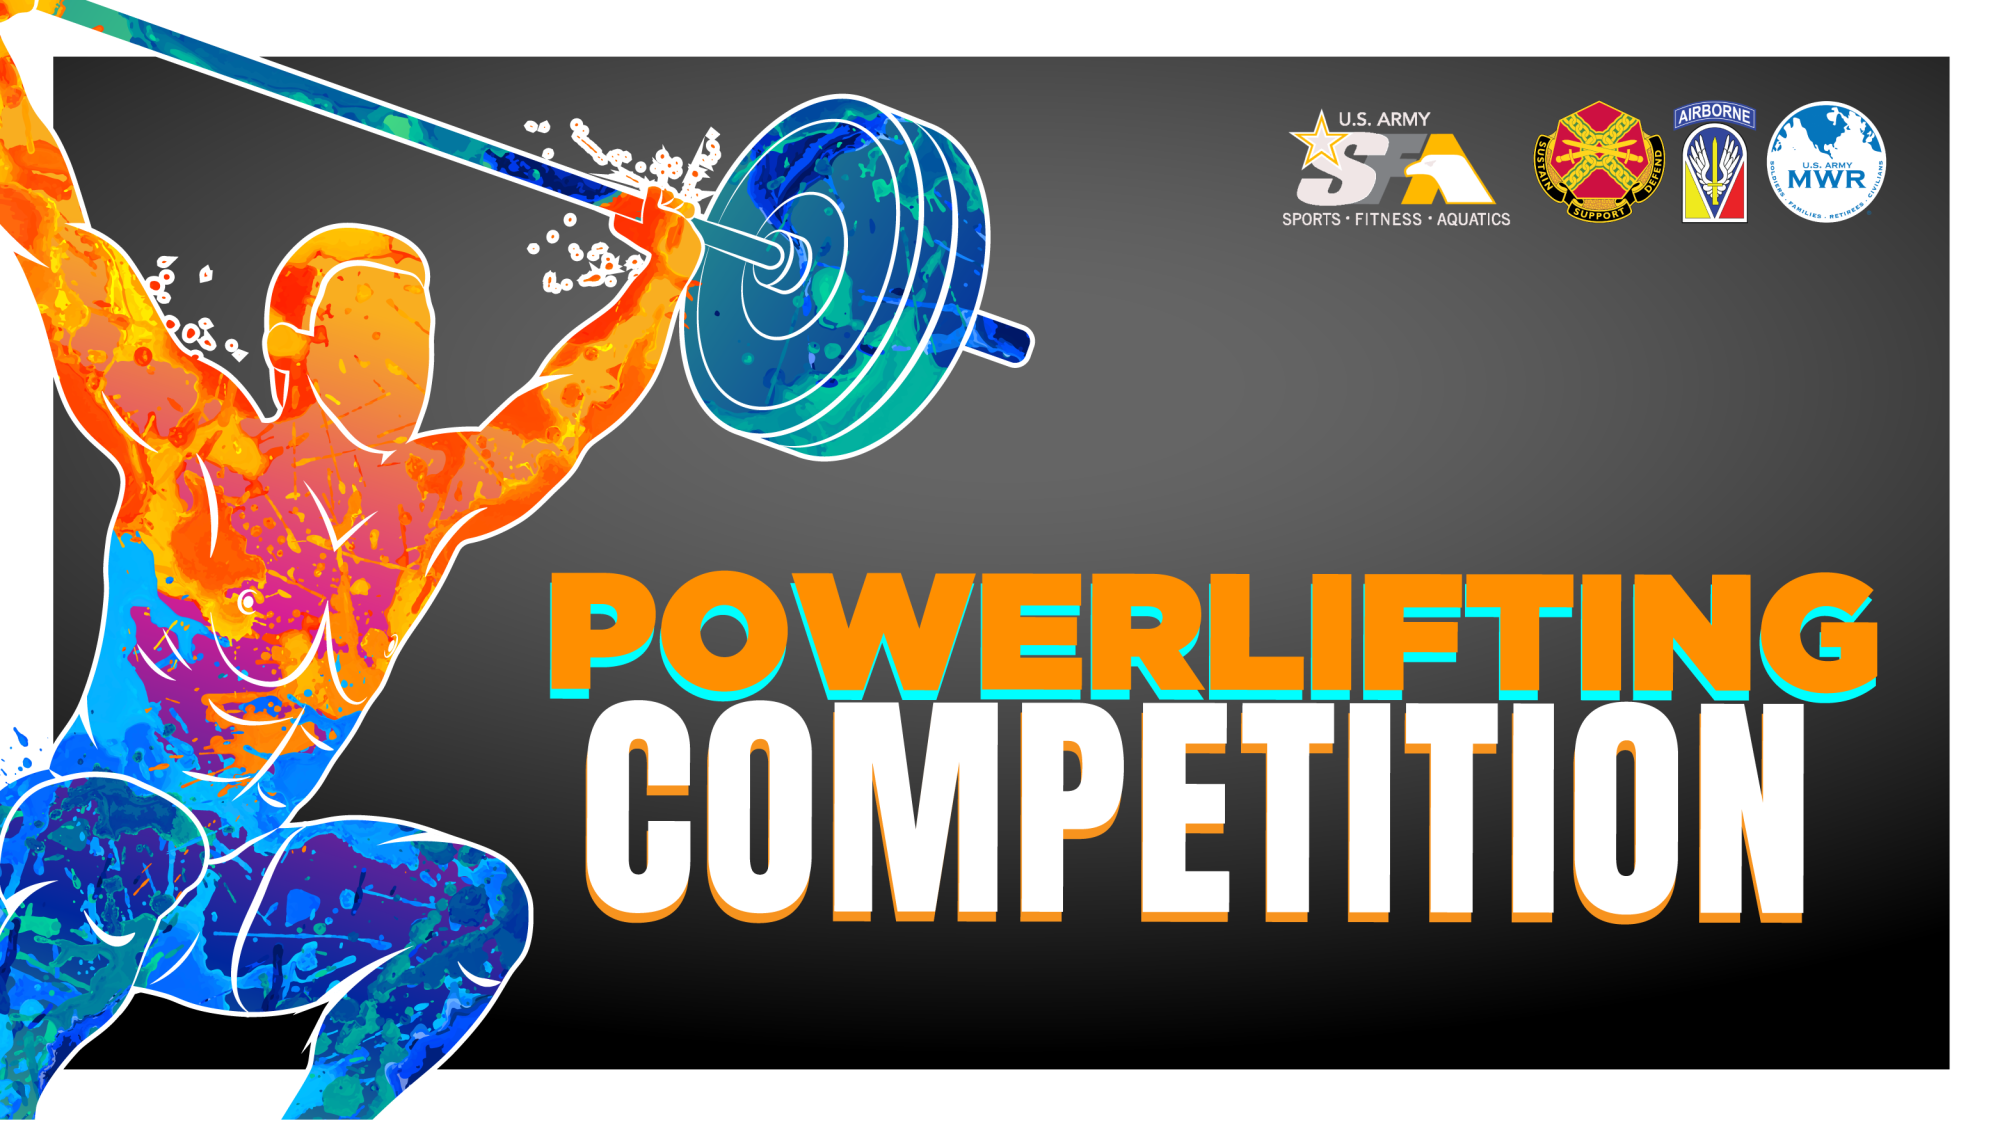 View Event :: Powerlifting Competition :: Ft. Johnson :: US Army MWR